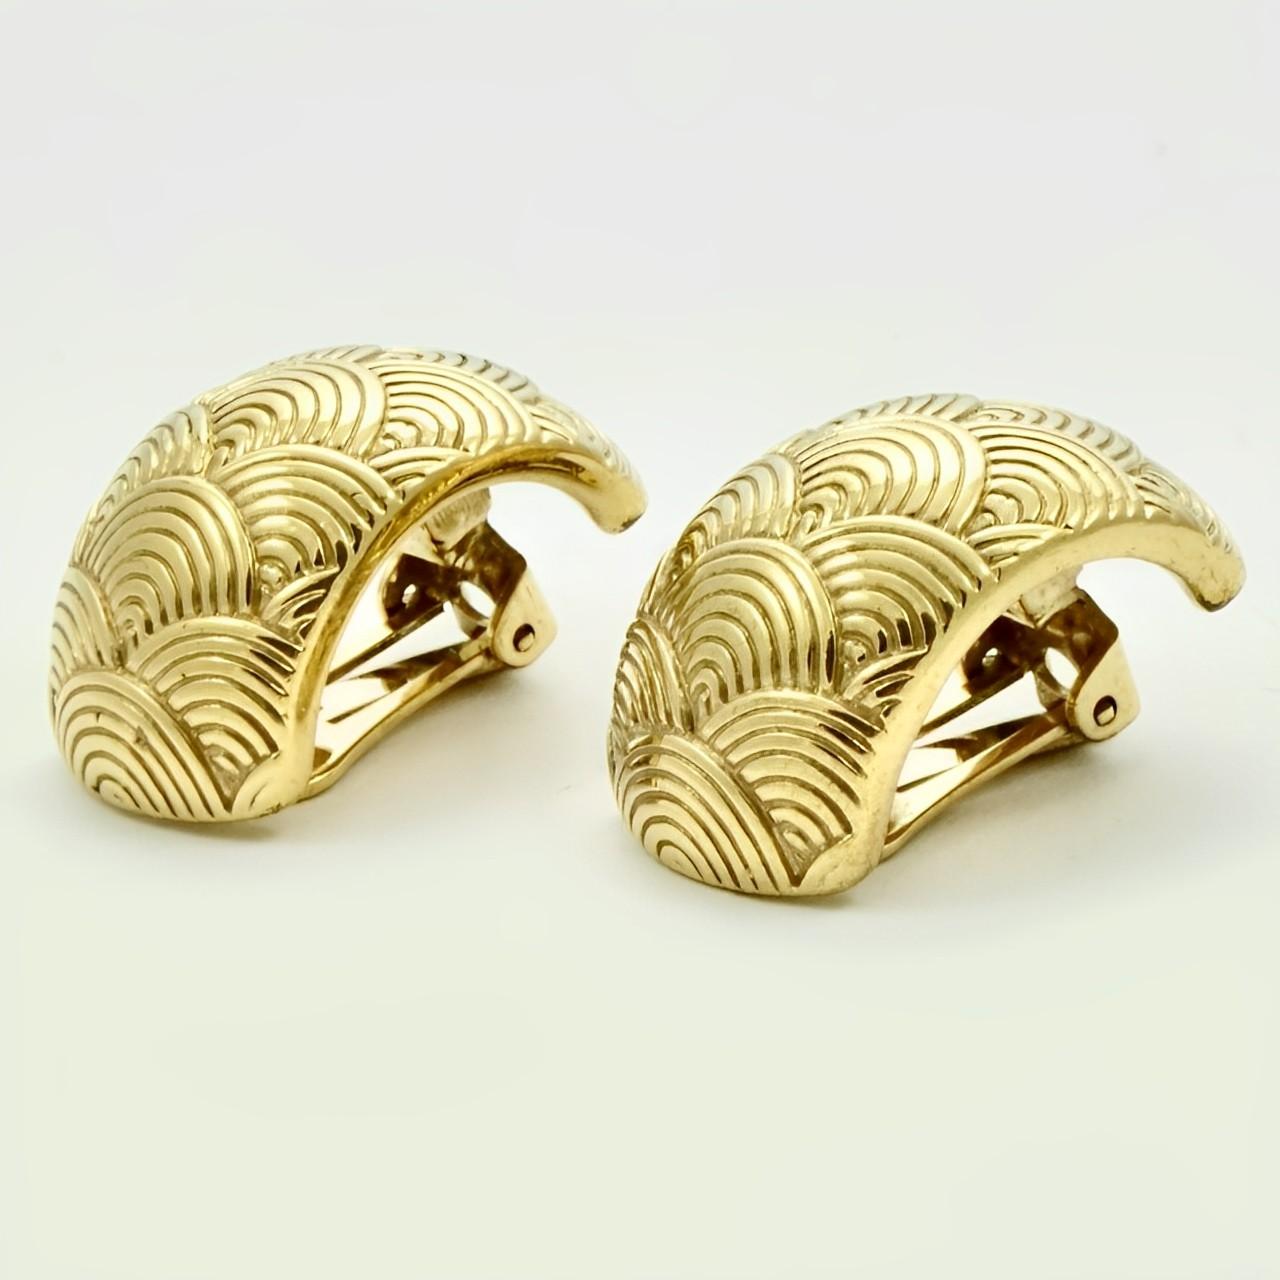 Pierre Lang Gold Plated Half Hoop Clip On Earrings with a Textured Design In Good Condition For Sale In London, GB